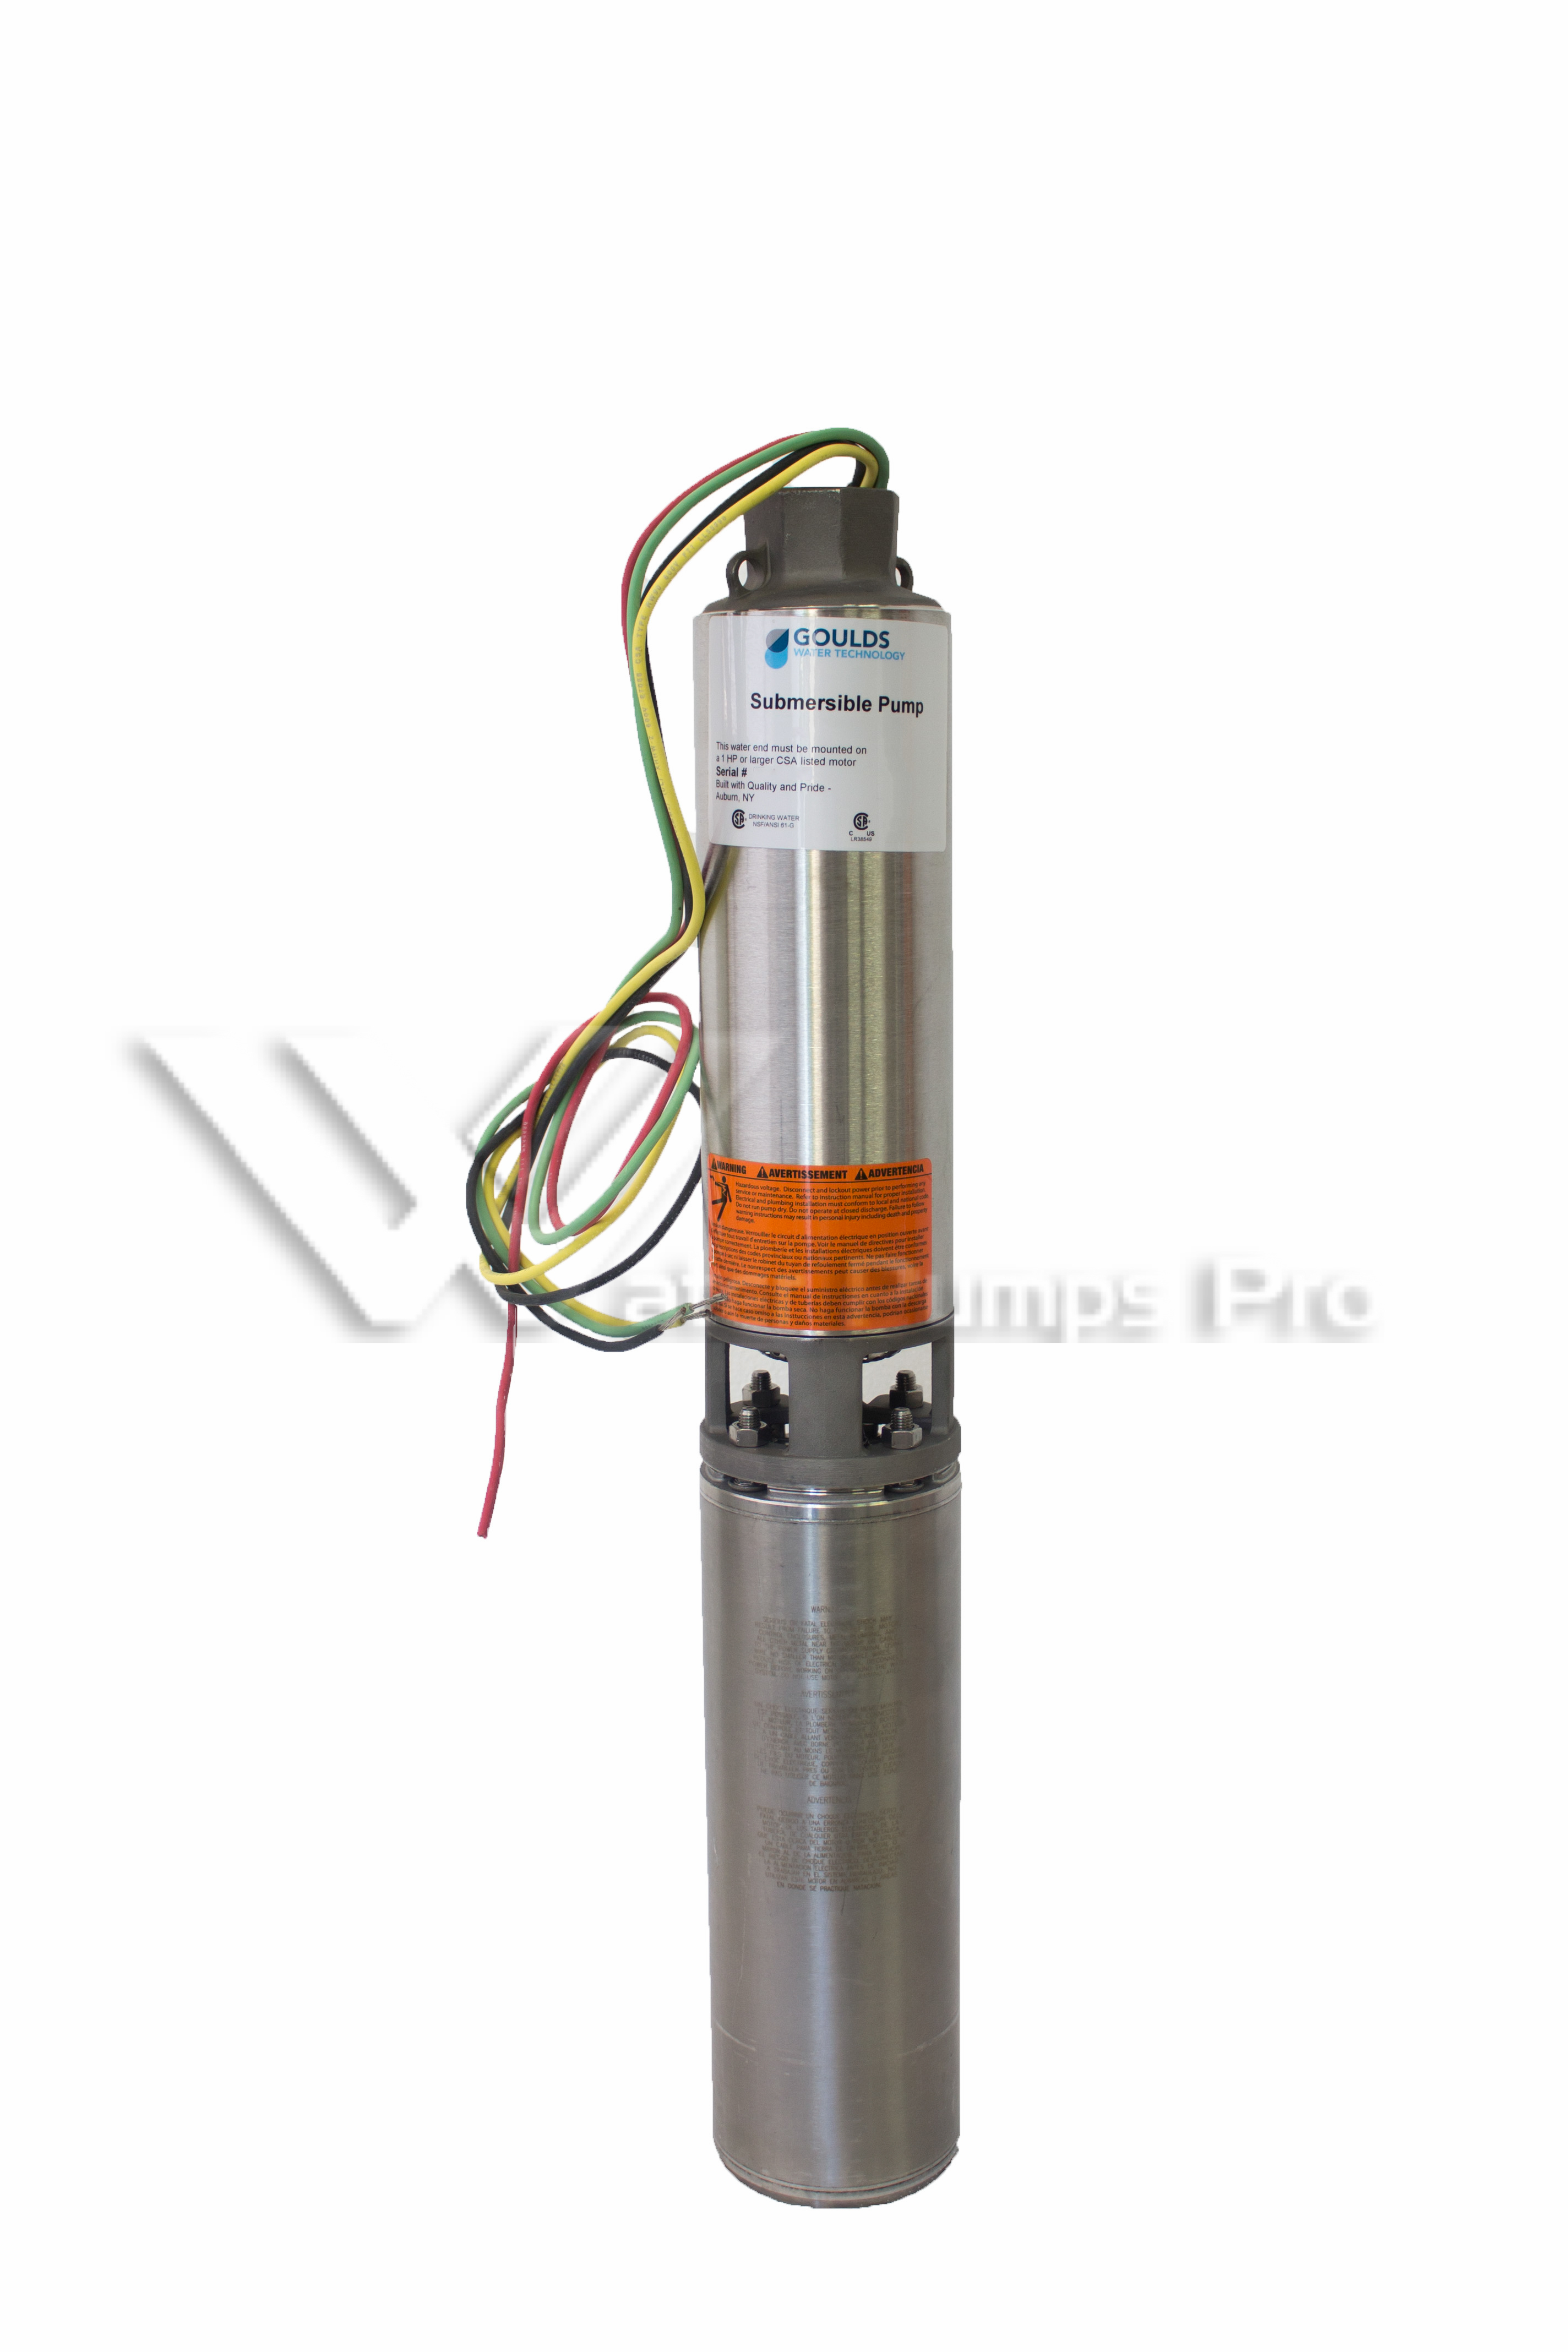 Goulds 10GS05411RCL 10GPM 1/2HP 115V 3Wire submersible well pump